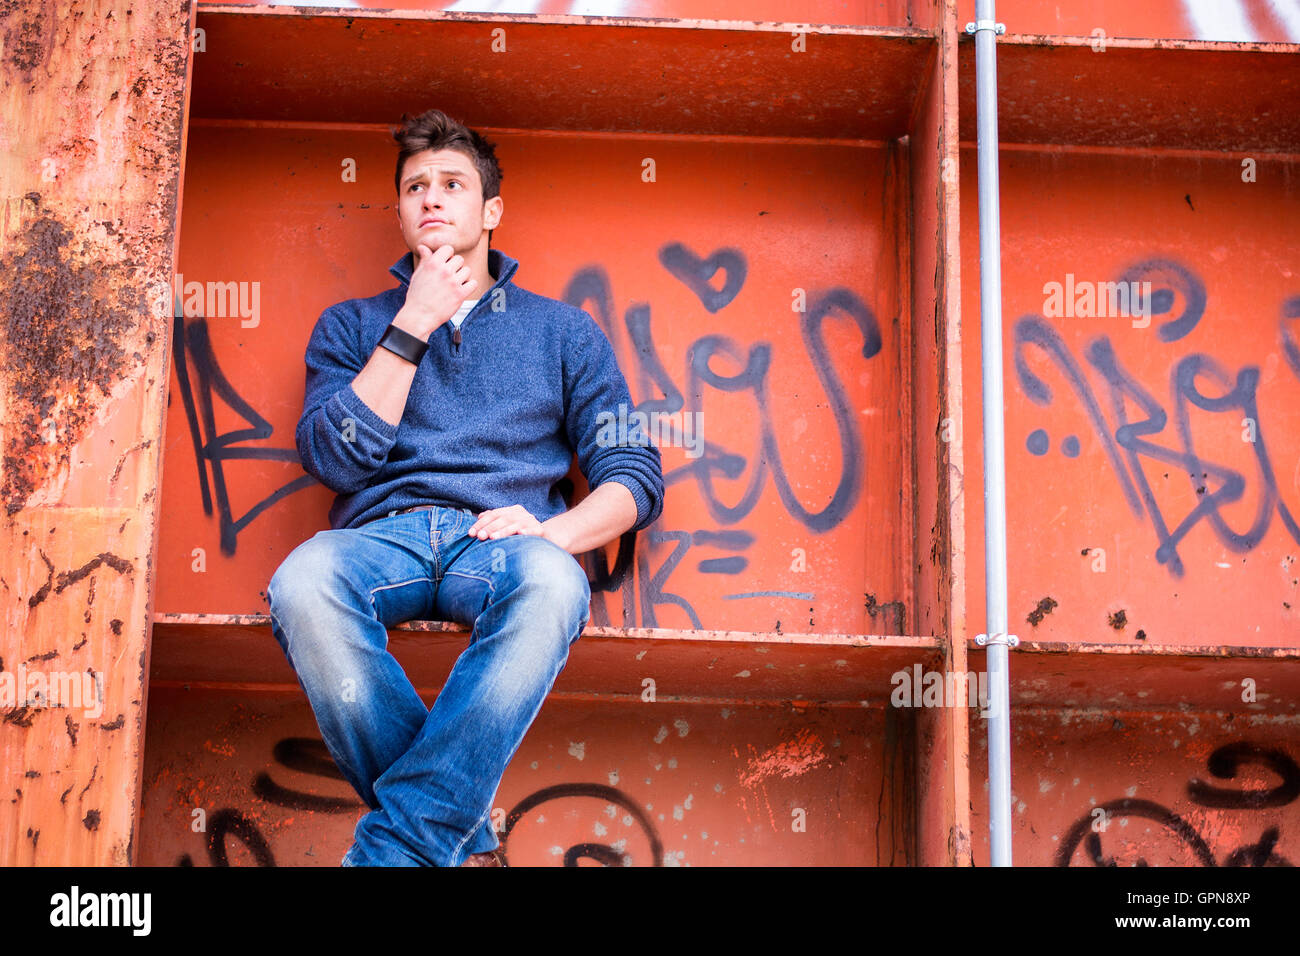 Attractive young man in urban setting sitting on orange metal structure, looking puzzled, thinking Stock Photo